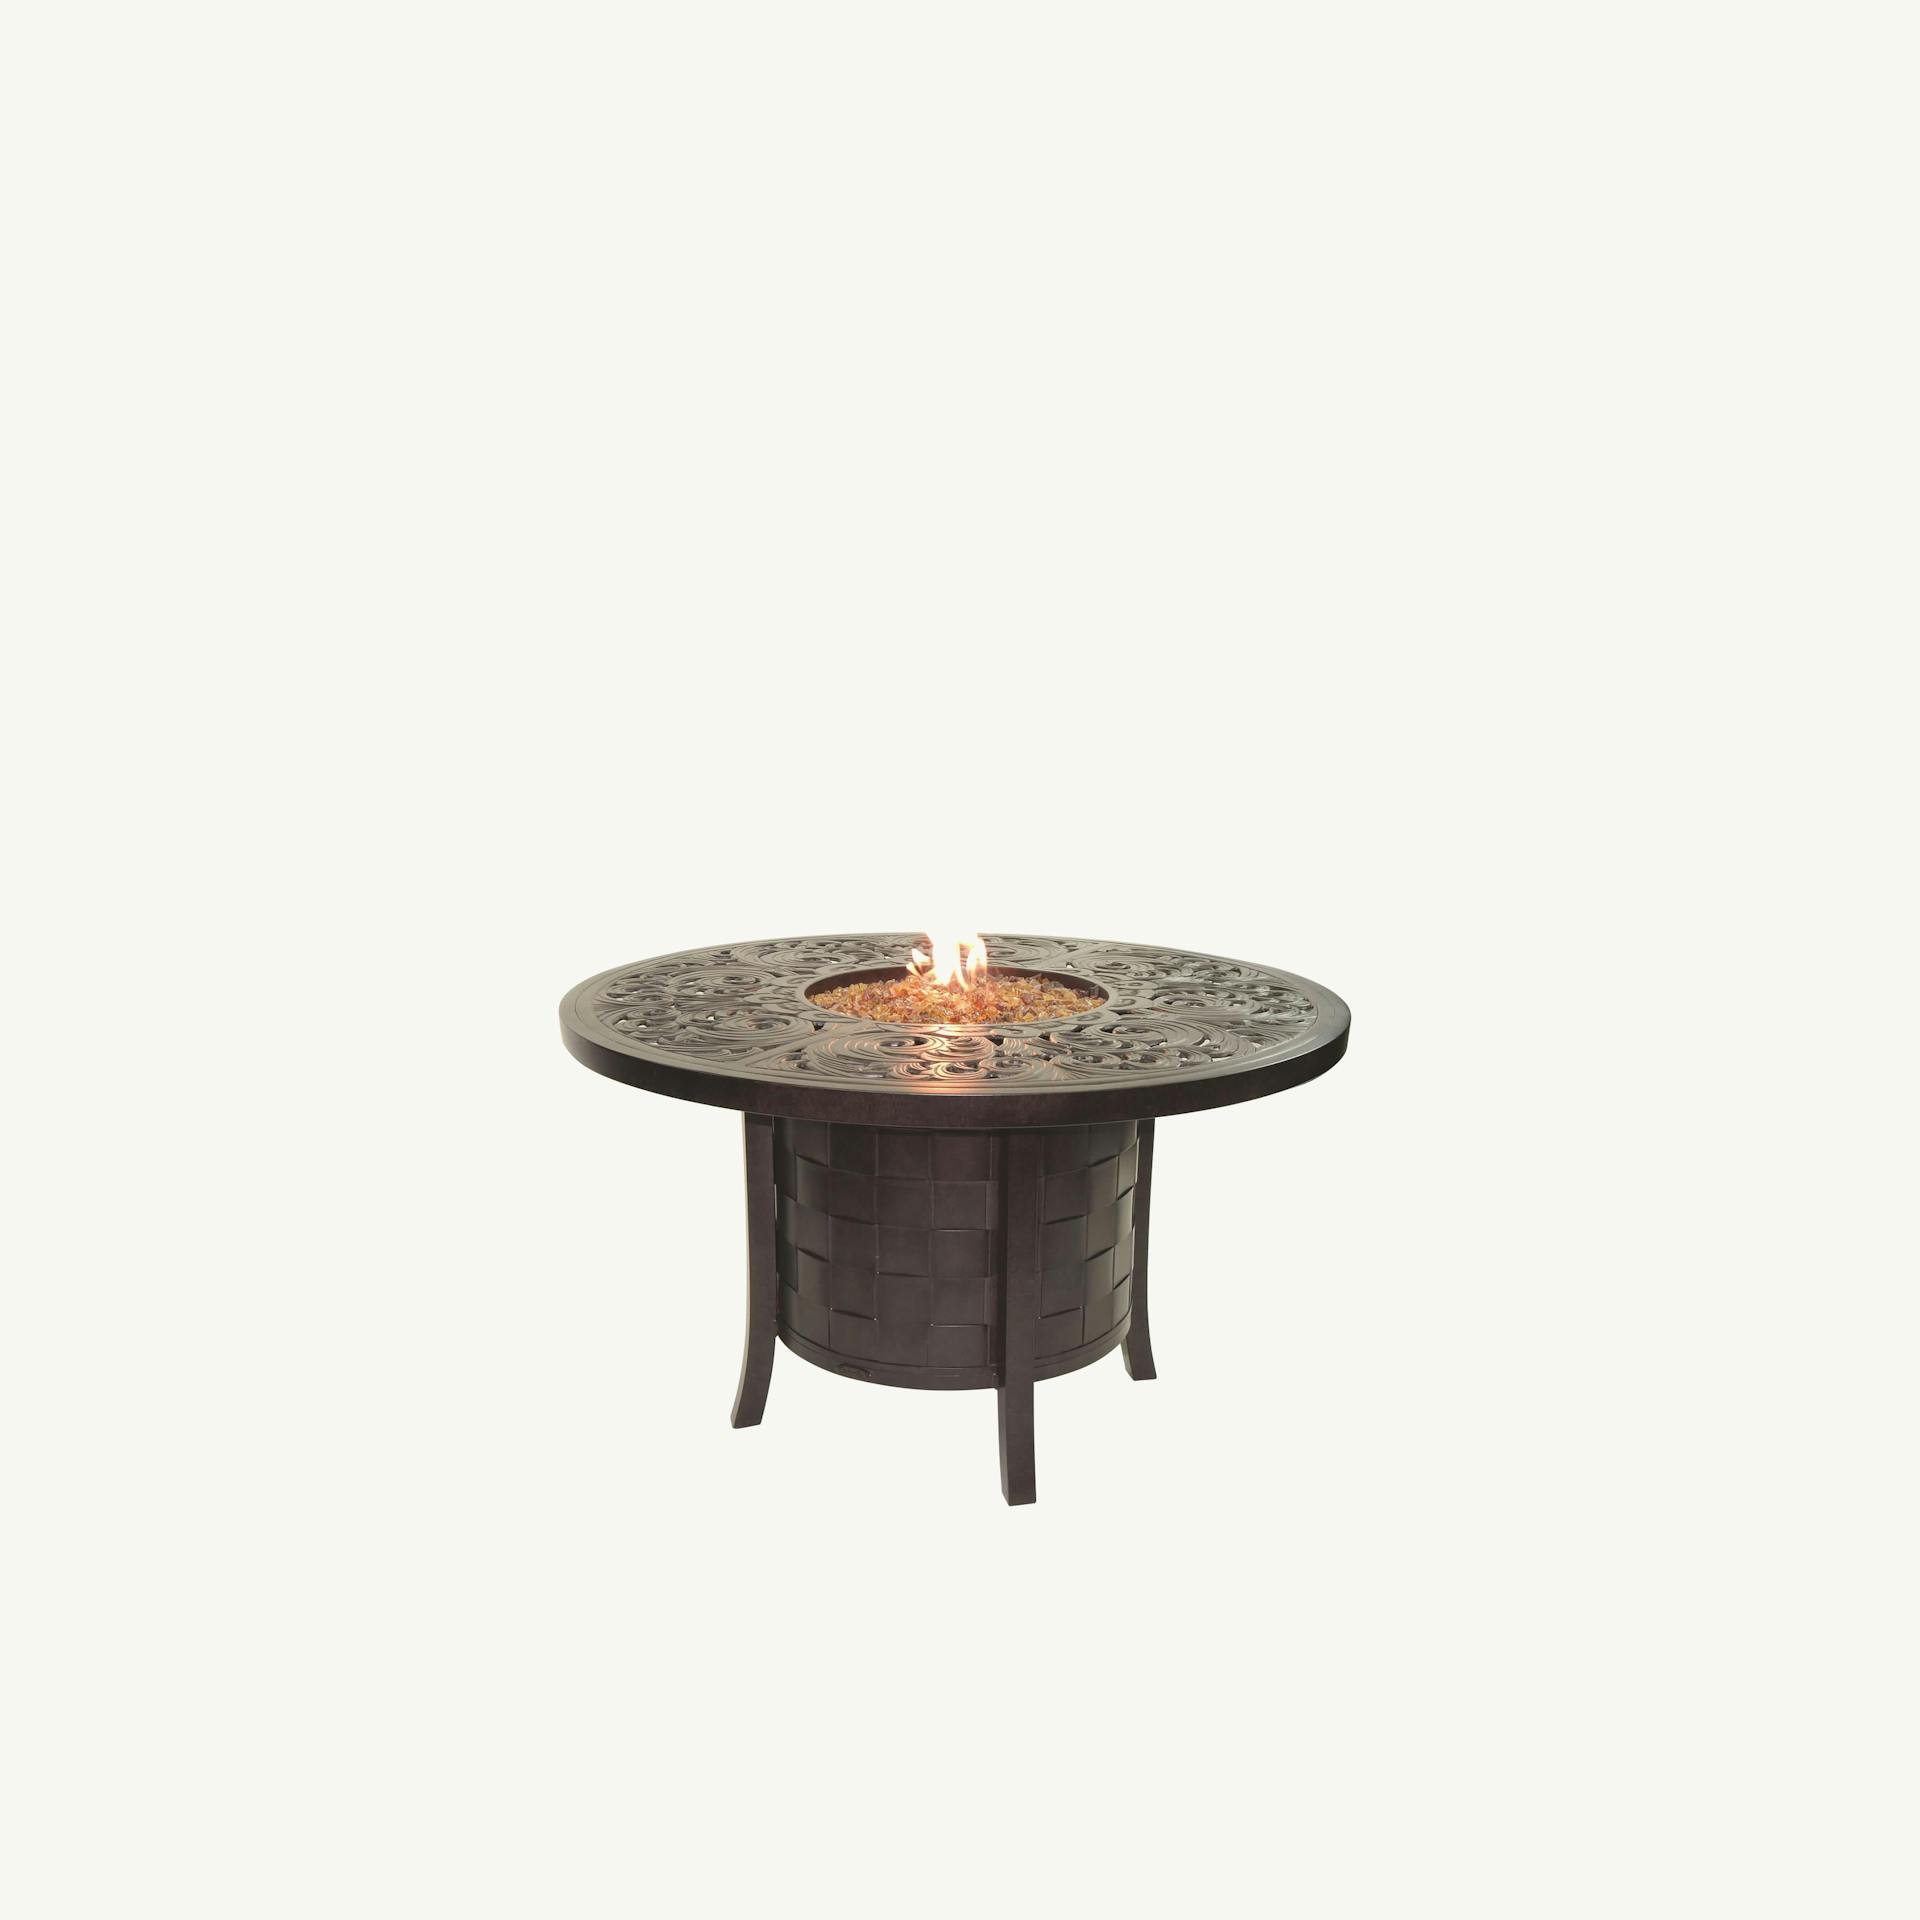 Classical 49" Round Classical Dining Table With Firepit